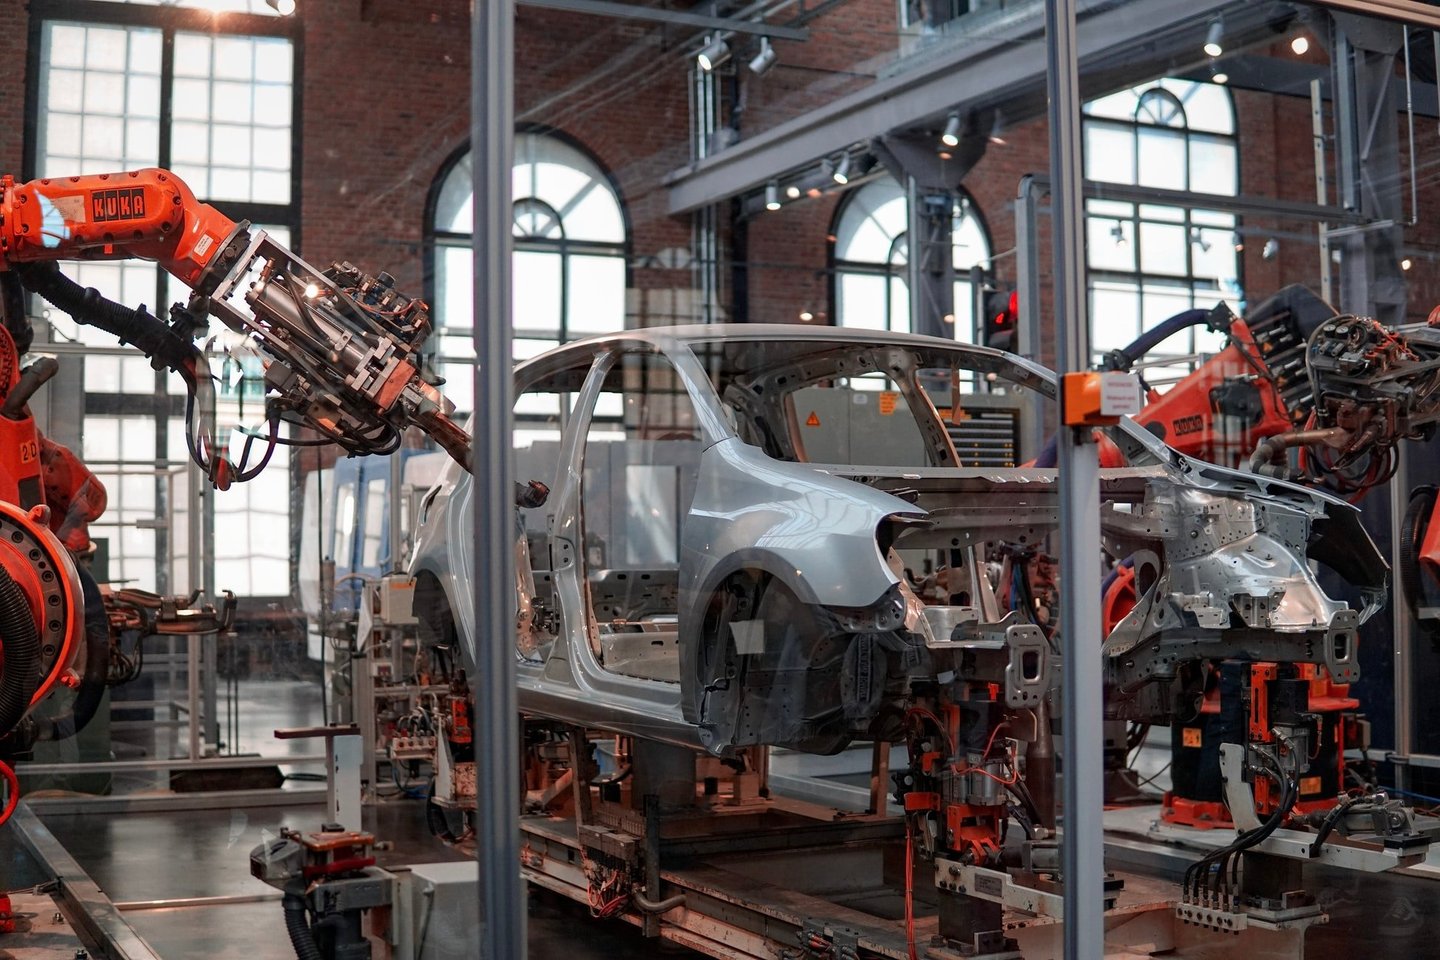 A car manufacturing robot in an industrial environment